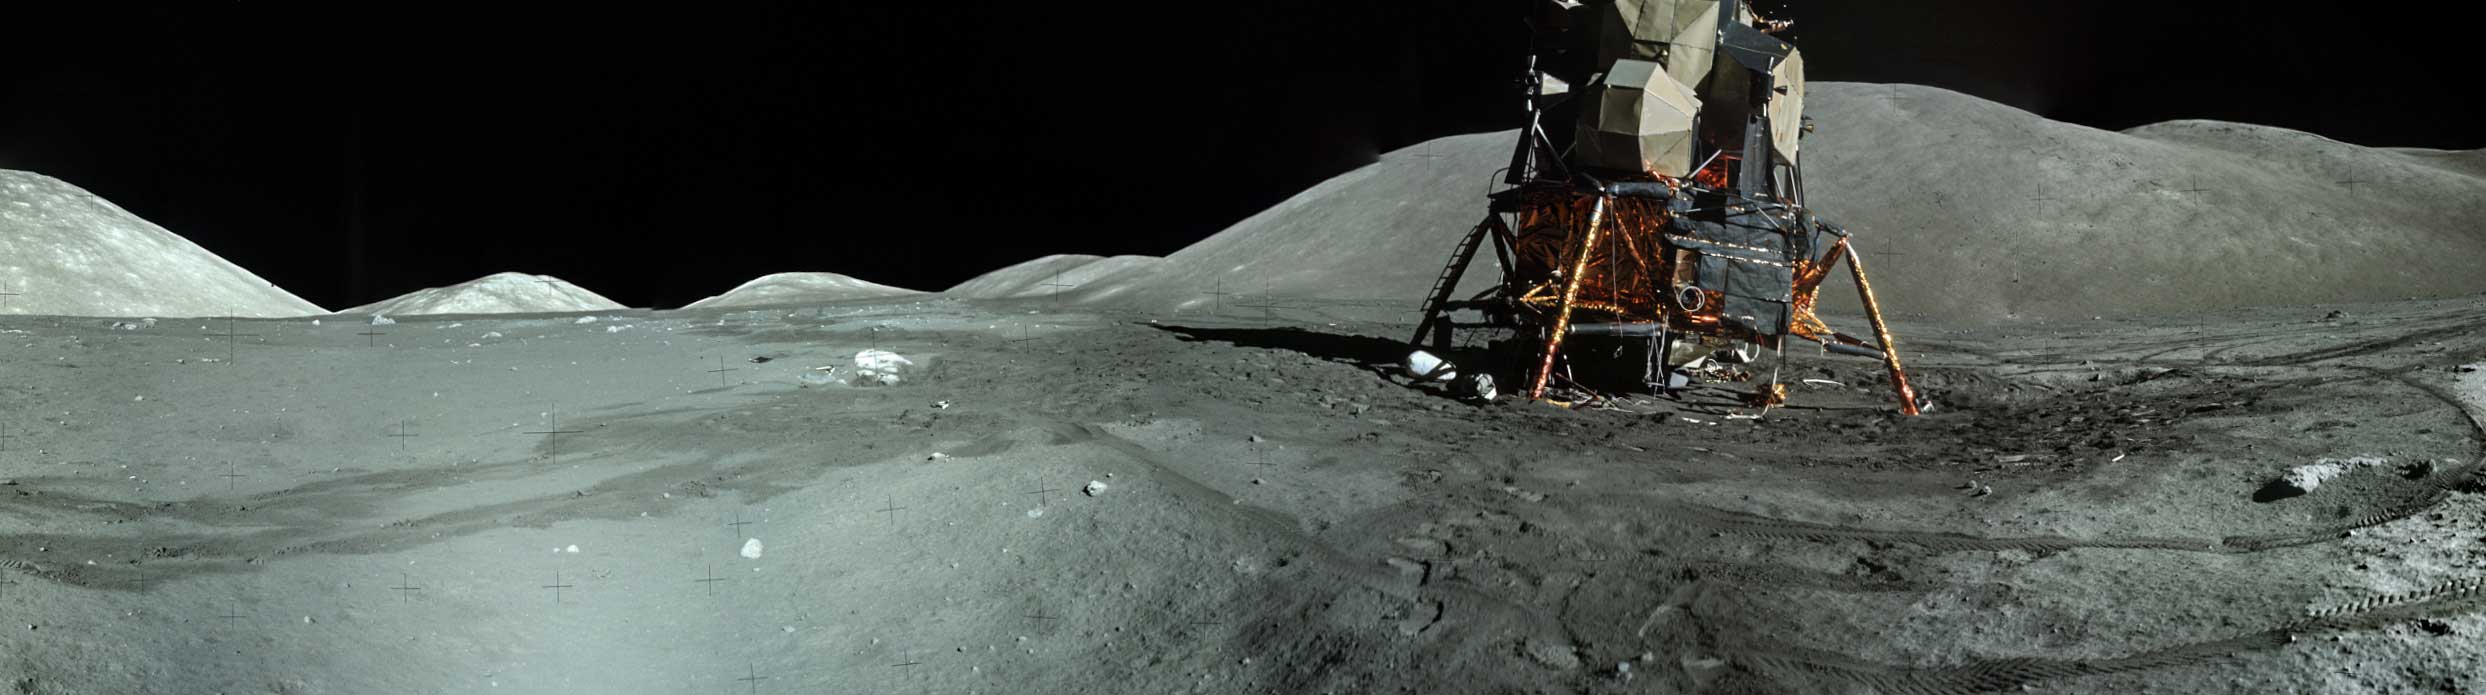 a wide shot of the moon landscape with a module on it